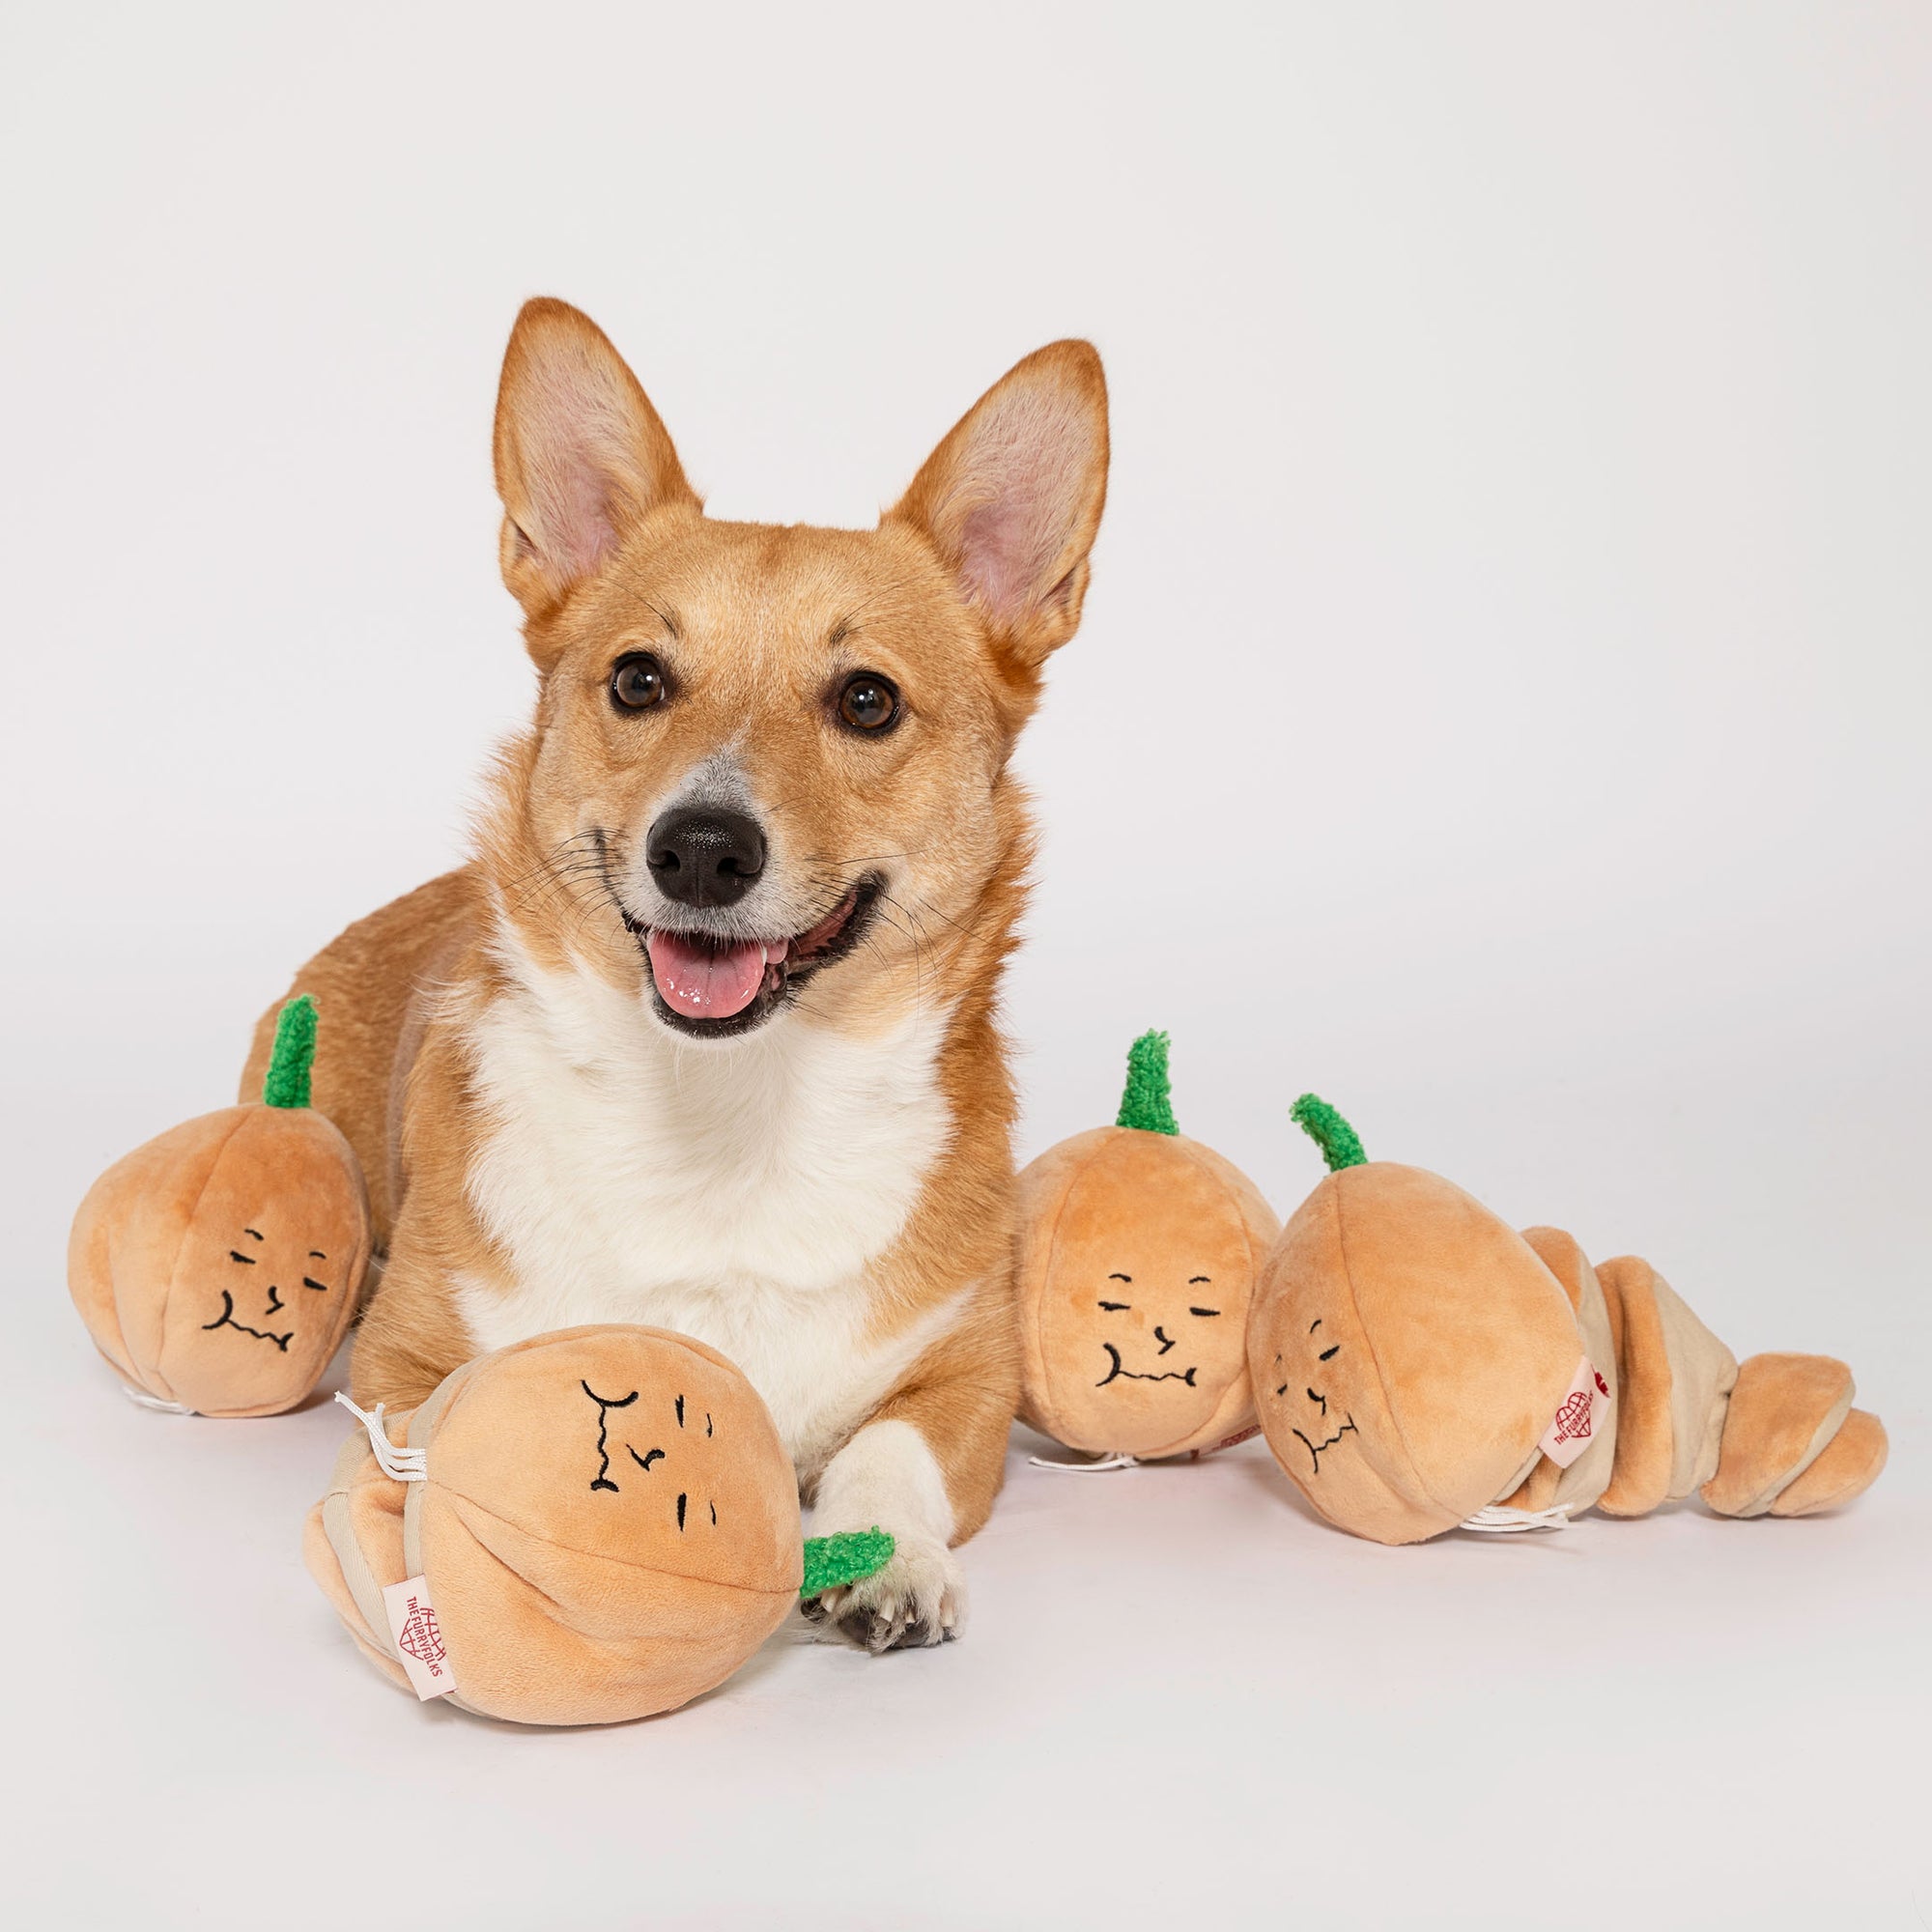 Happy corgi with a bright smile, lying among several yellow onion-shaped nosework toys, perfect for engaging and fun dog training.